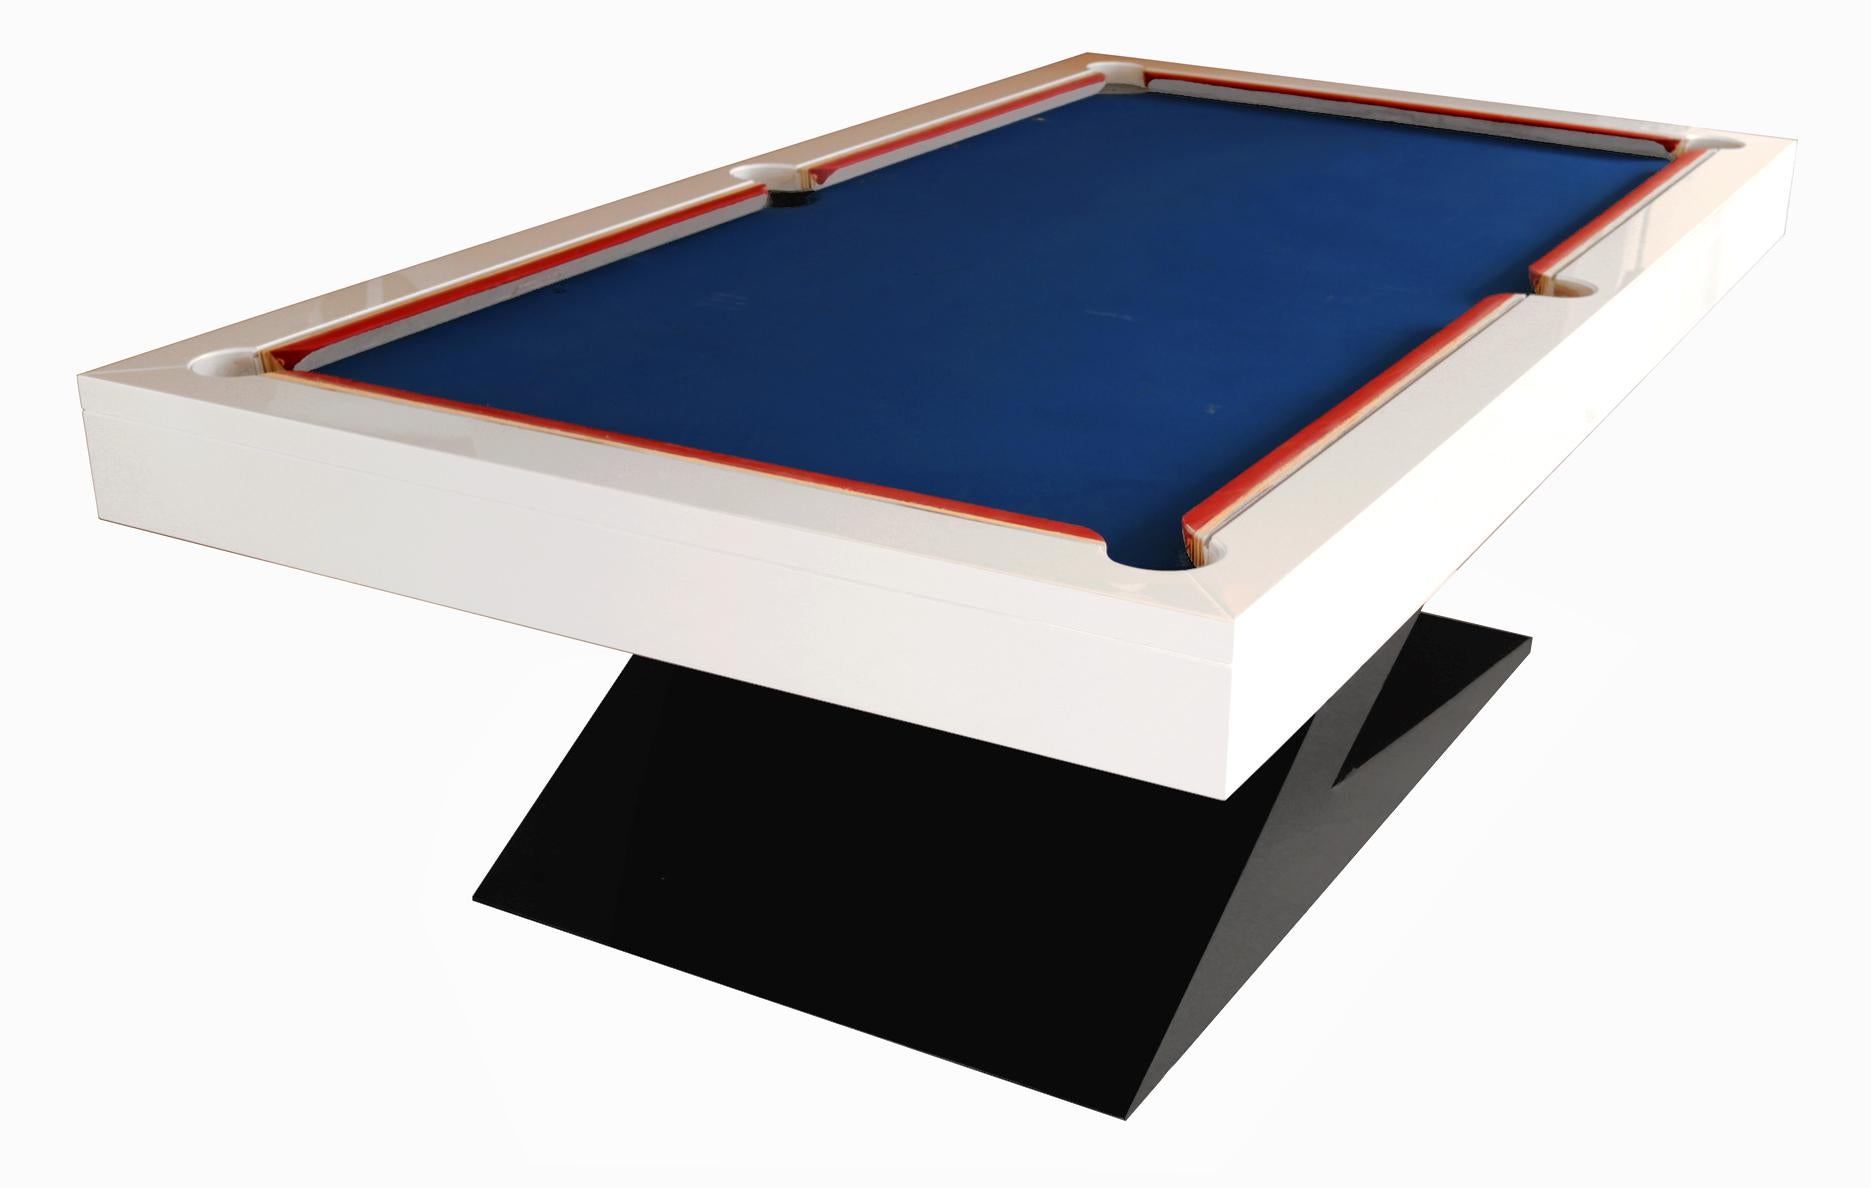 Dining table, Billiard, snooker pool table and ping-pong table with a modern design.

A fine quality adjustable mahogany dining snooker, billiard, pool table.The billiard dining table comes with three removable leaves. The leaves turn the pool table